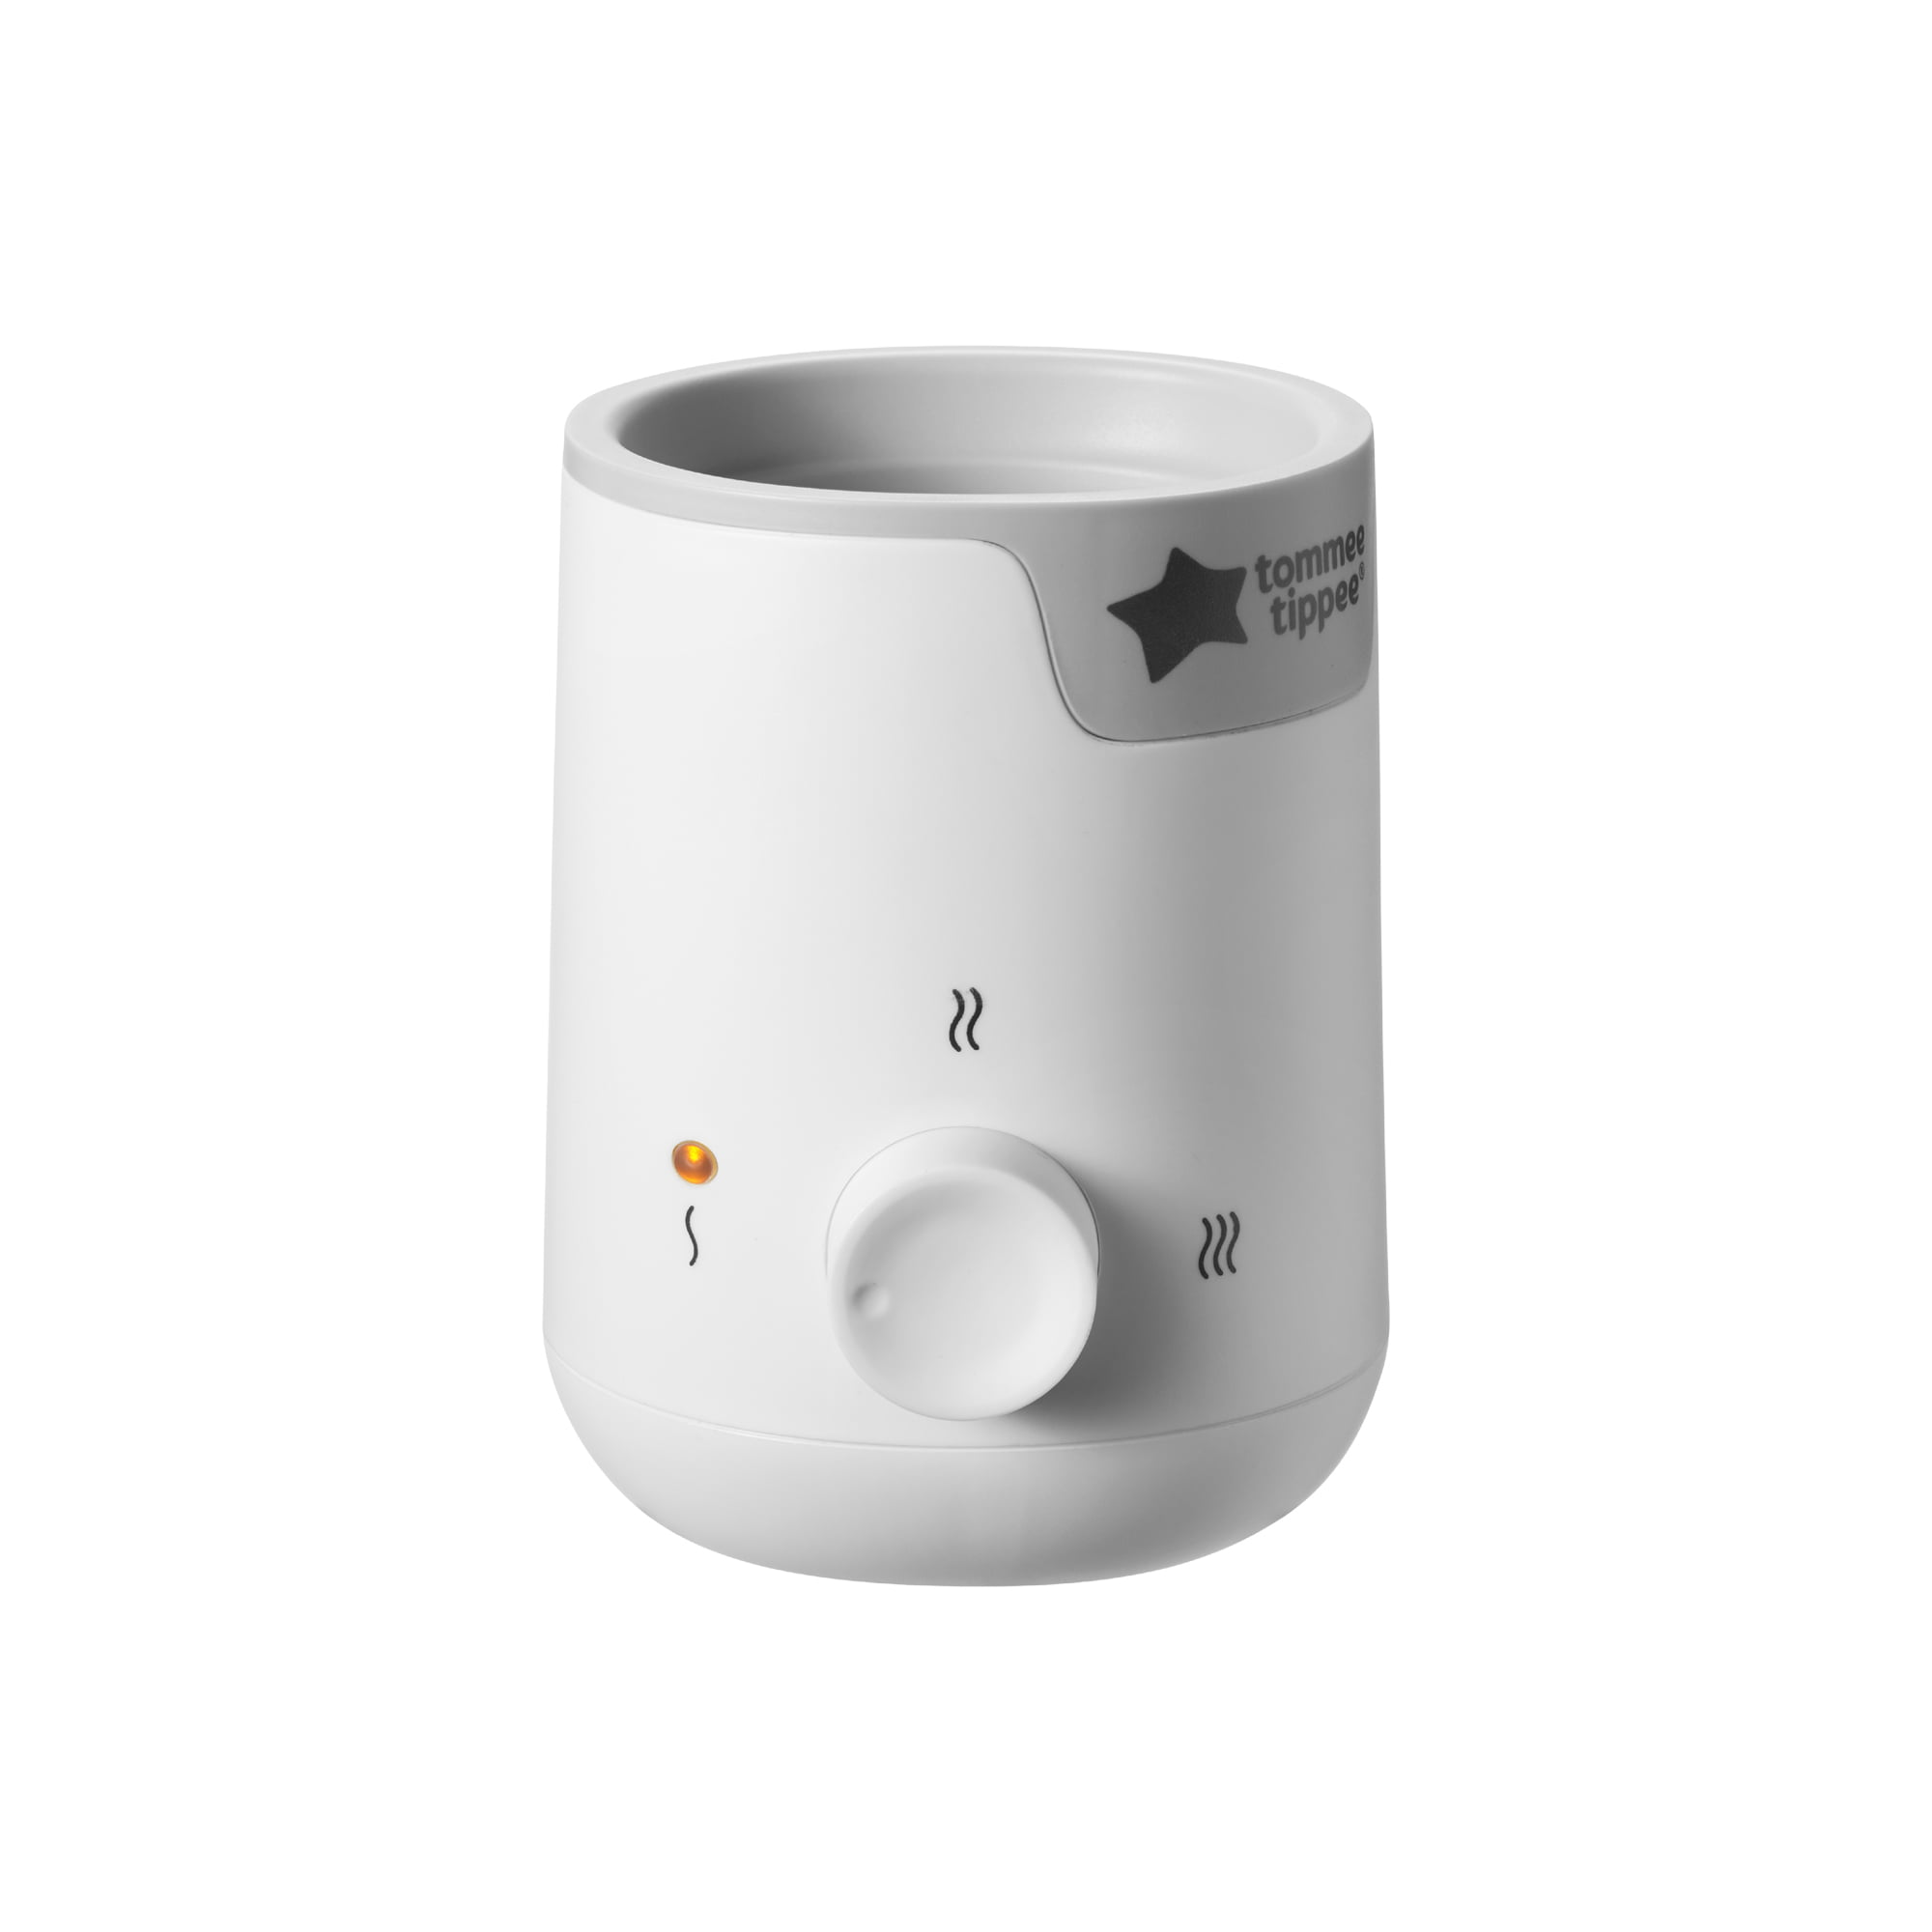 tommee tippee accessories